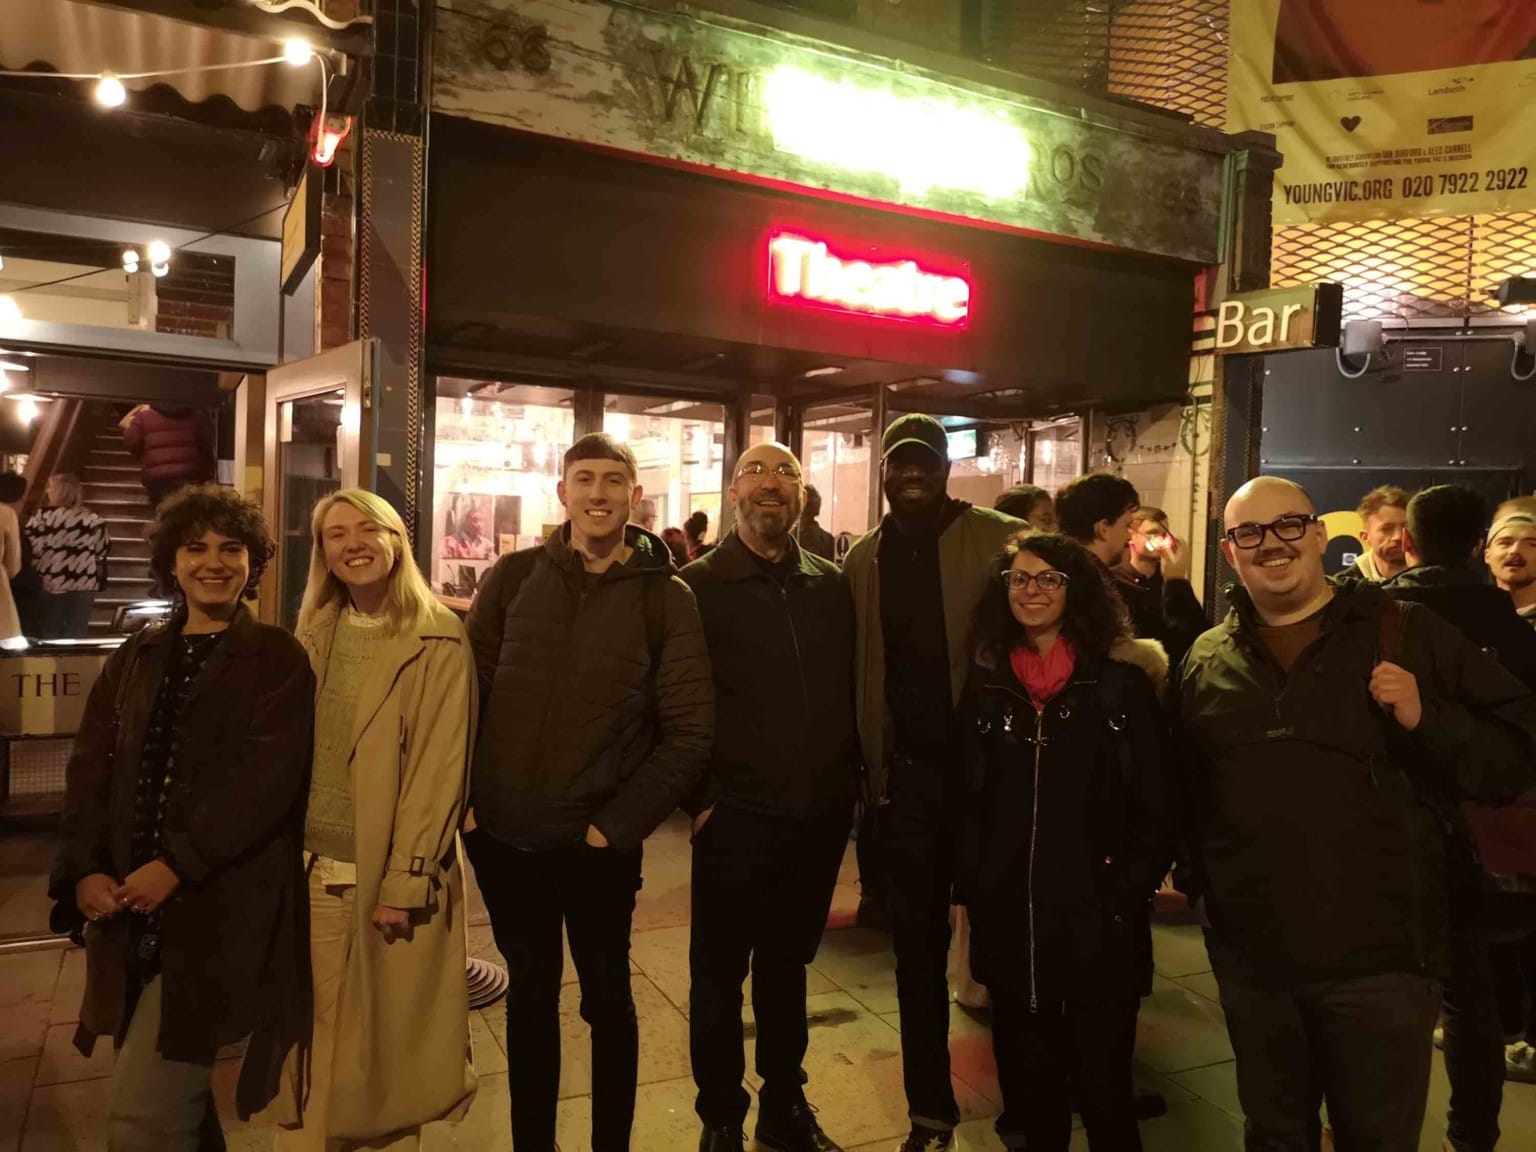 A Cog team photo outside The Young Vic